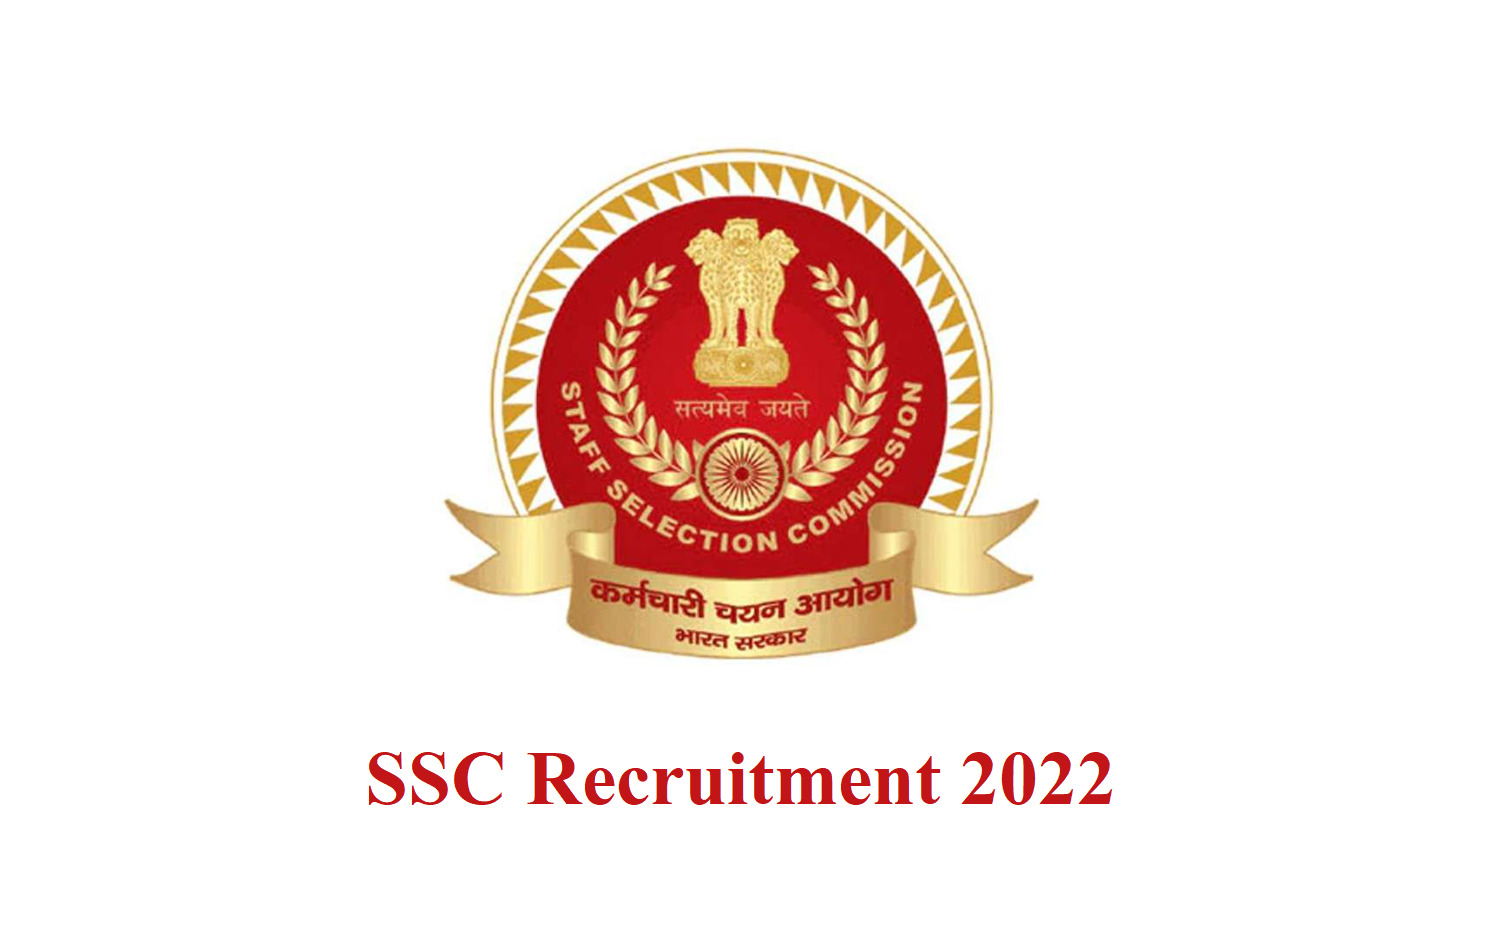 Sarkari Naukri Notification of SSC CGL 2022 will be issued on this date